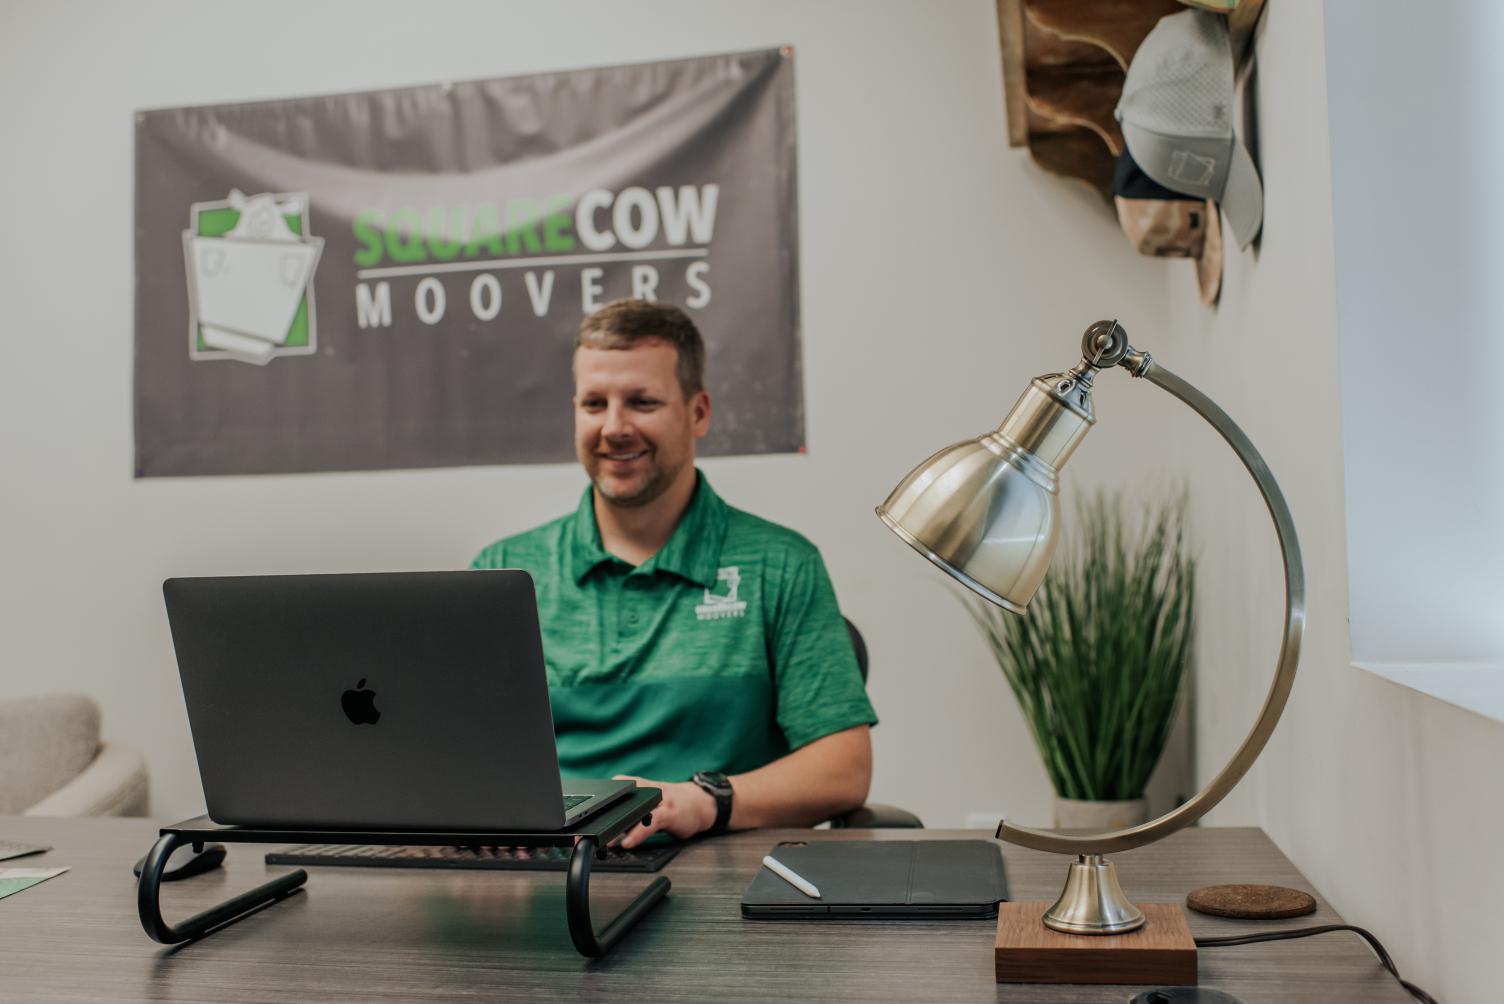 Square Cow Moovers Franchise Family